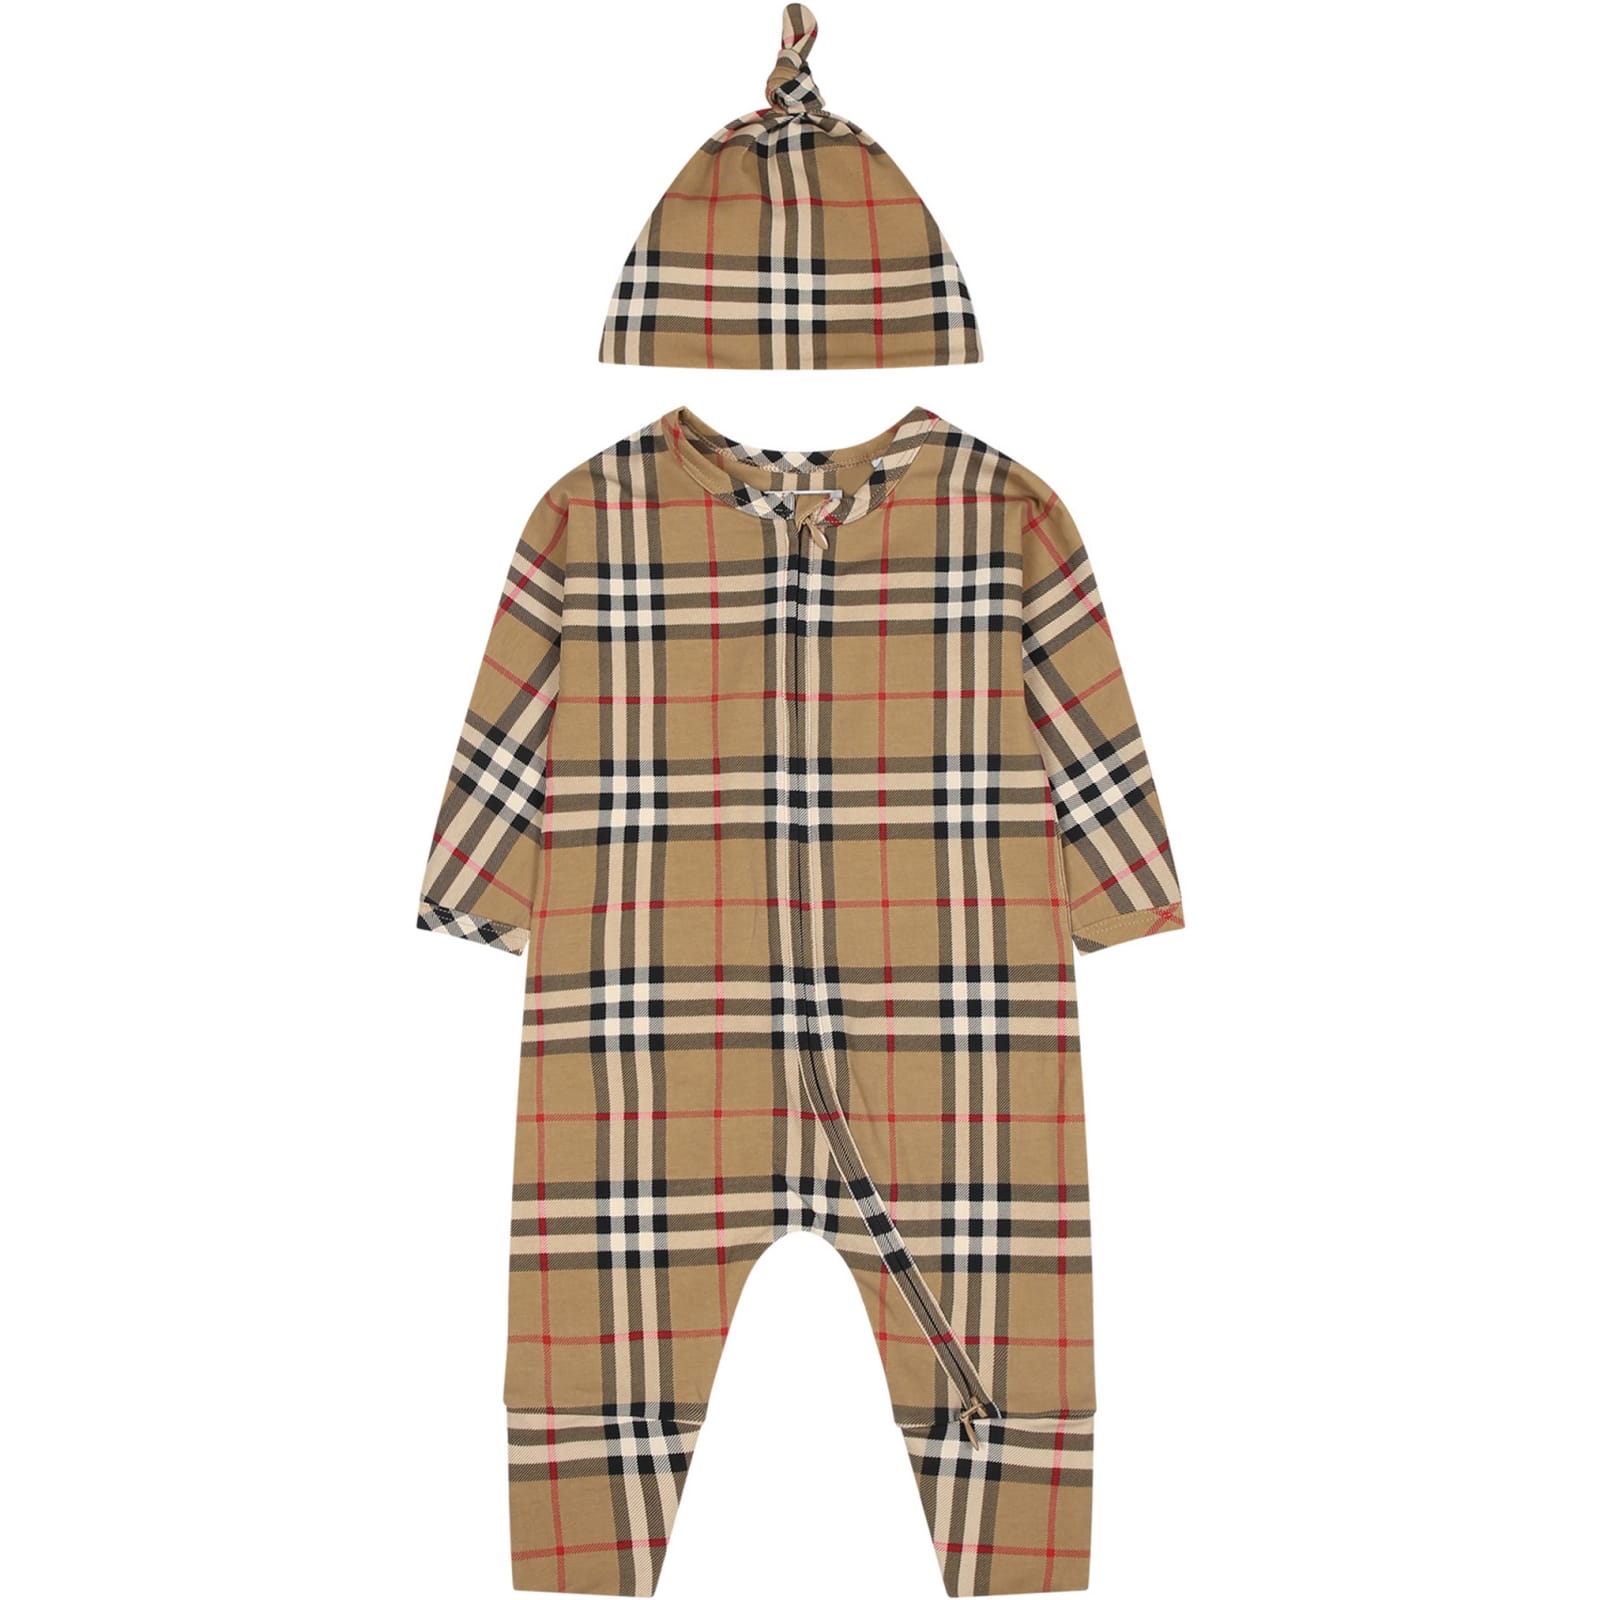 BURBERRY BEIGE SET FOR BABYKIDS WITH THE ICONIC VINTAGE CHECK